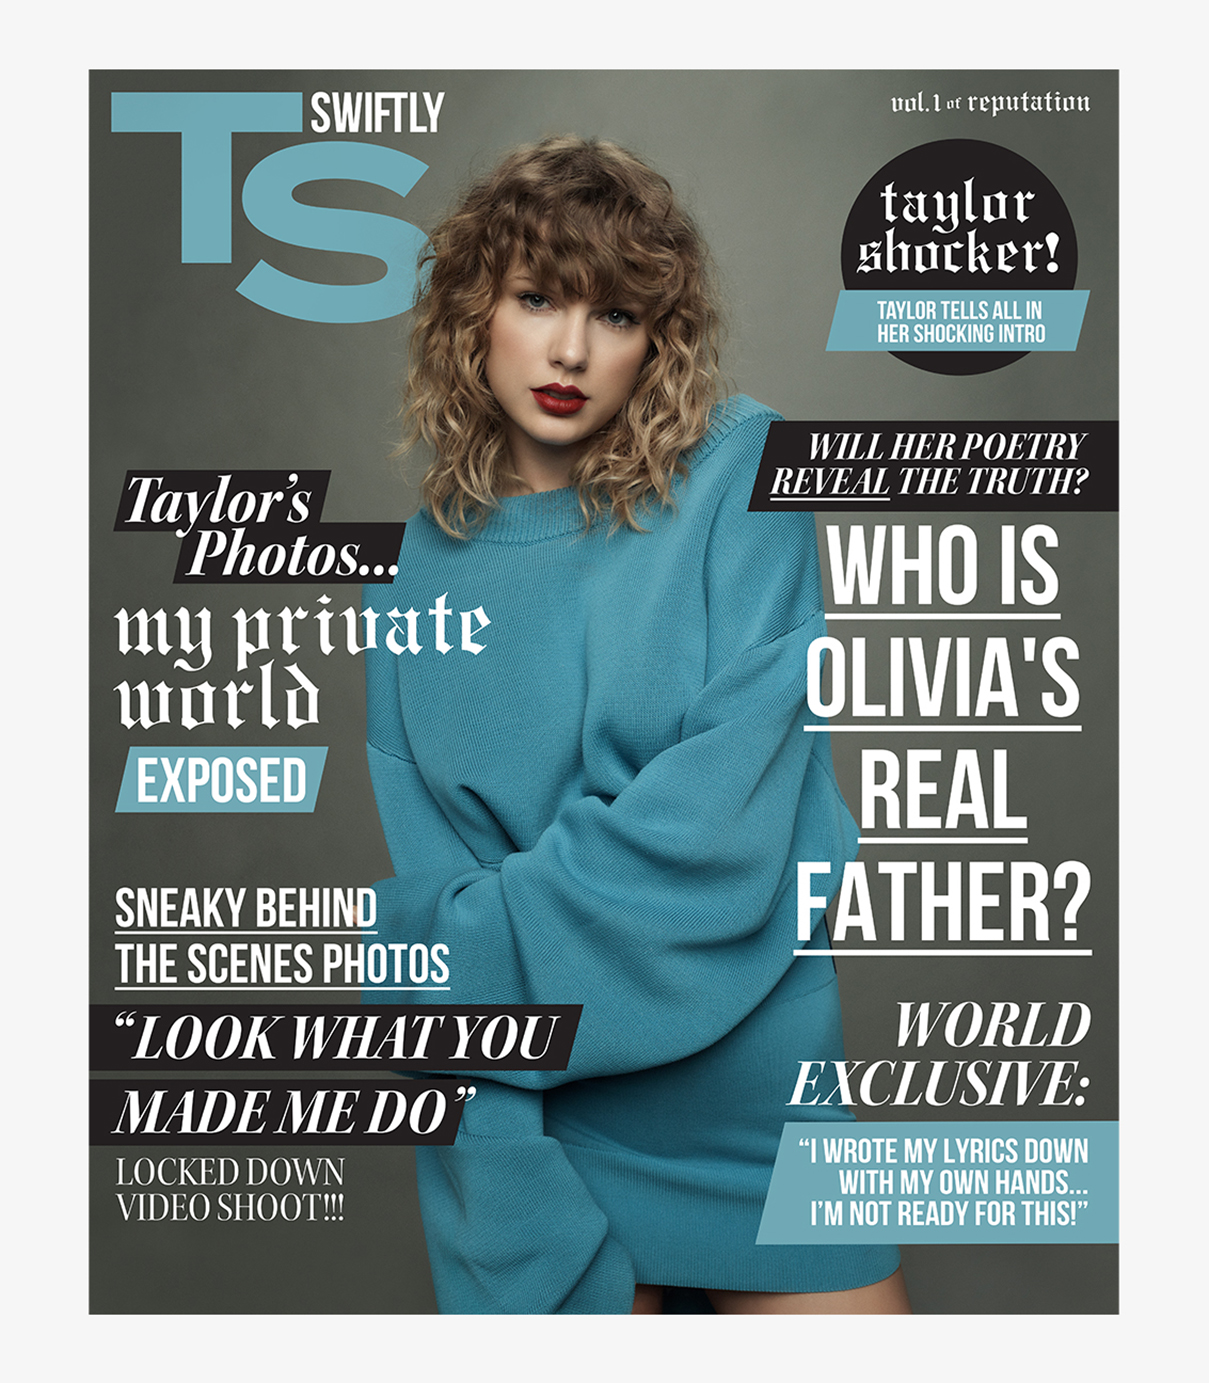 tabloid themed design for back cover of reputation volume 1